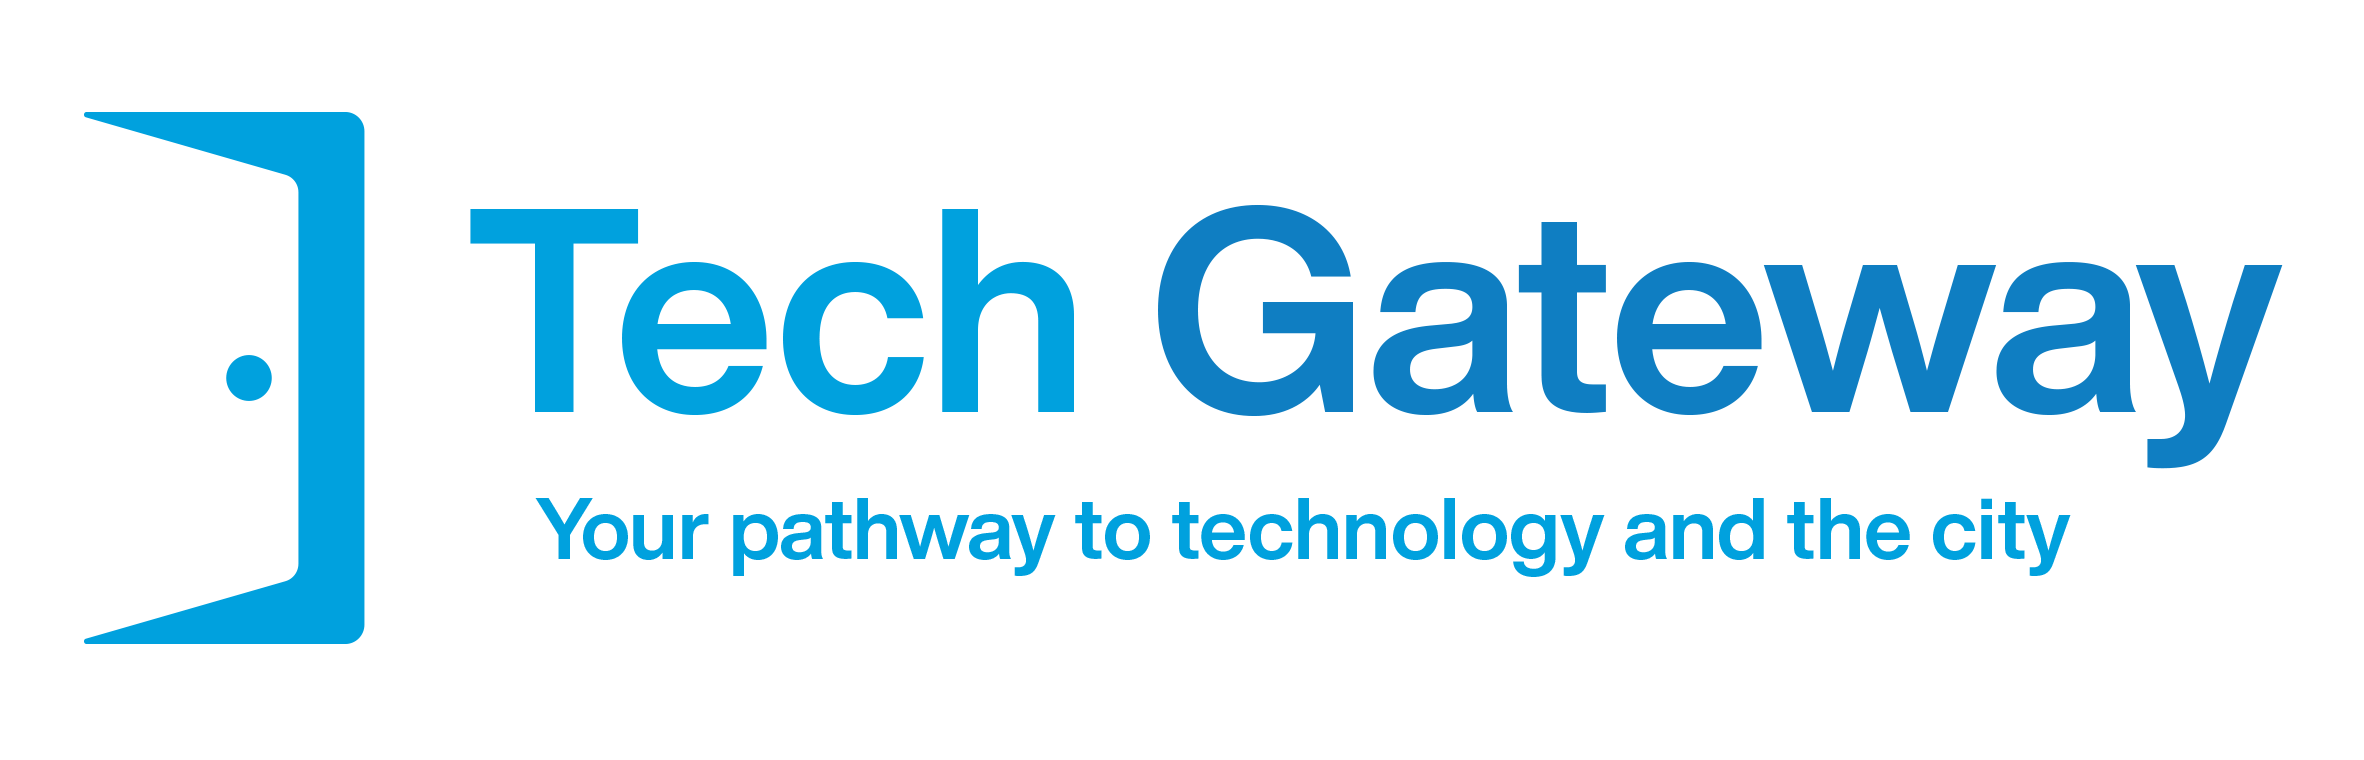 Welcome to Tech Gateway